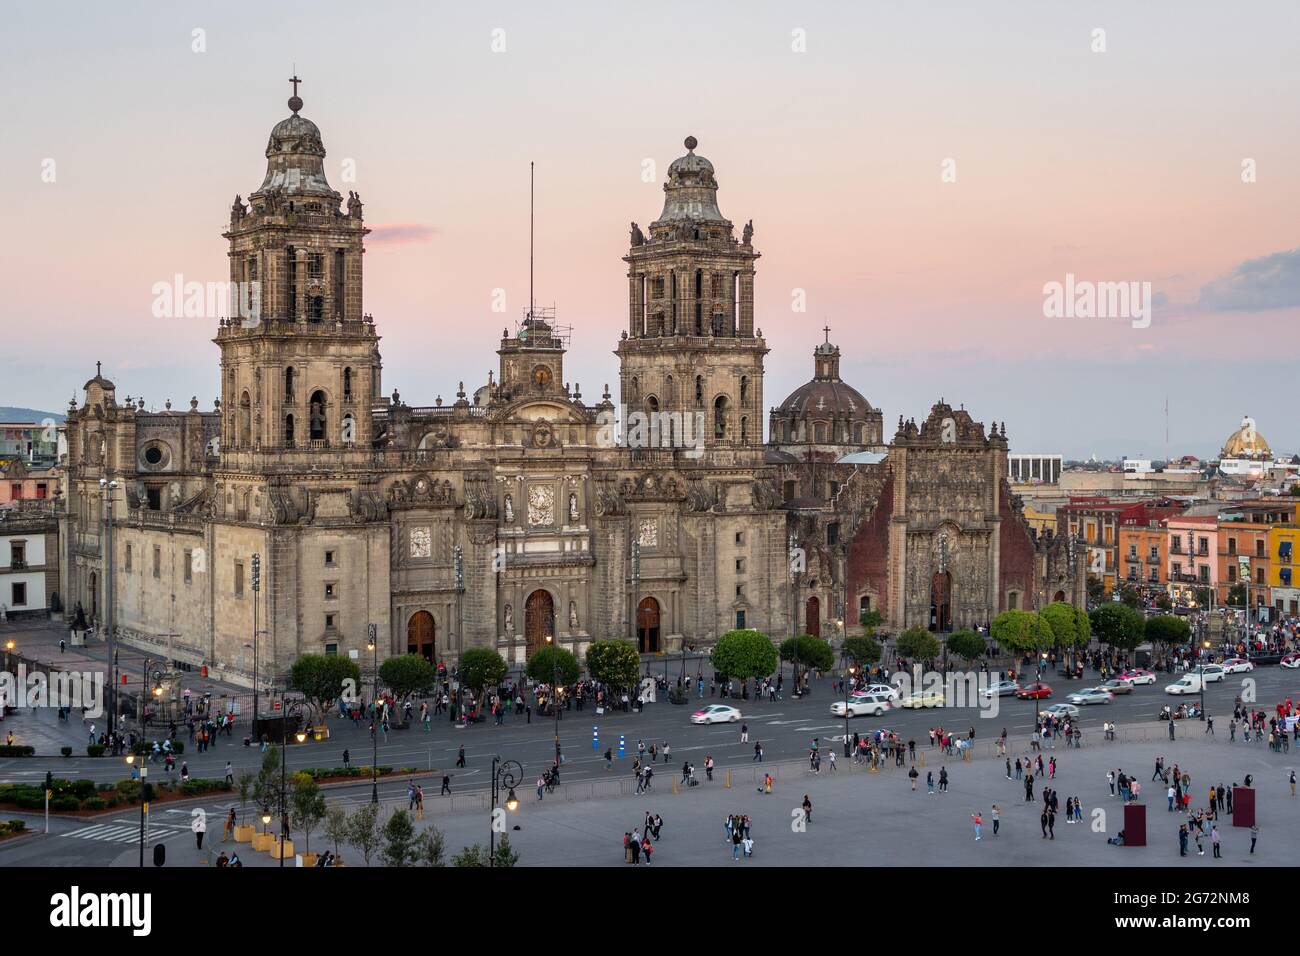 Historical landmark Metropolitan Cathedral at sunset in the Historic Centre of Mexico City, Mexico. Stock Photo